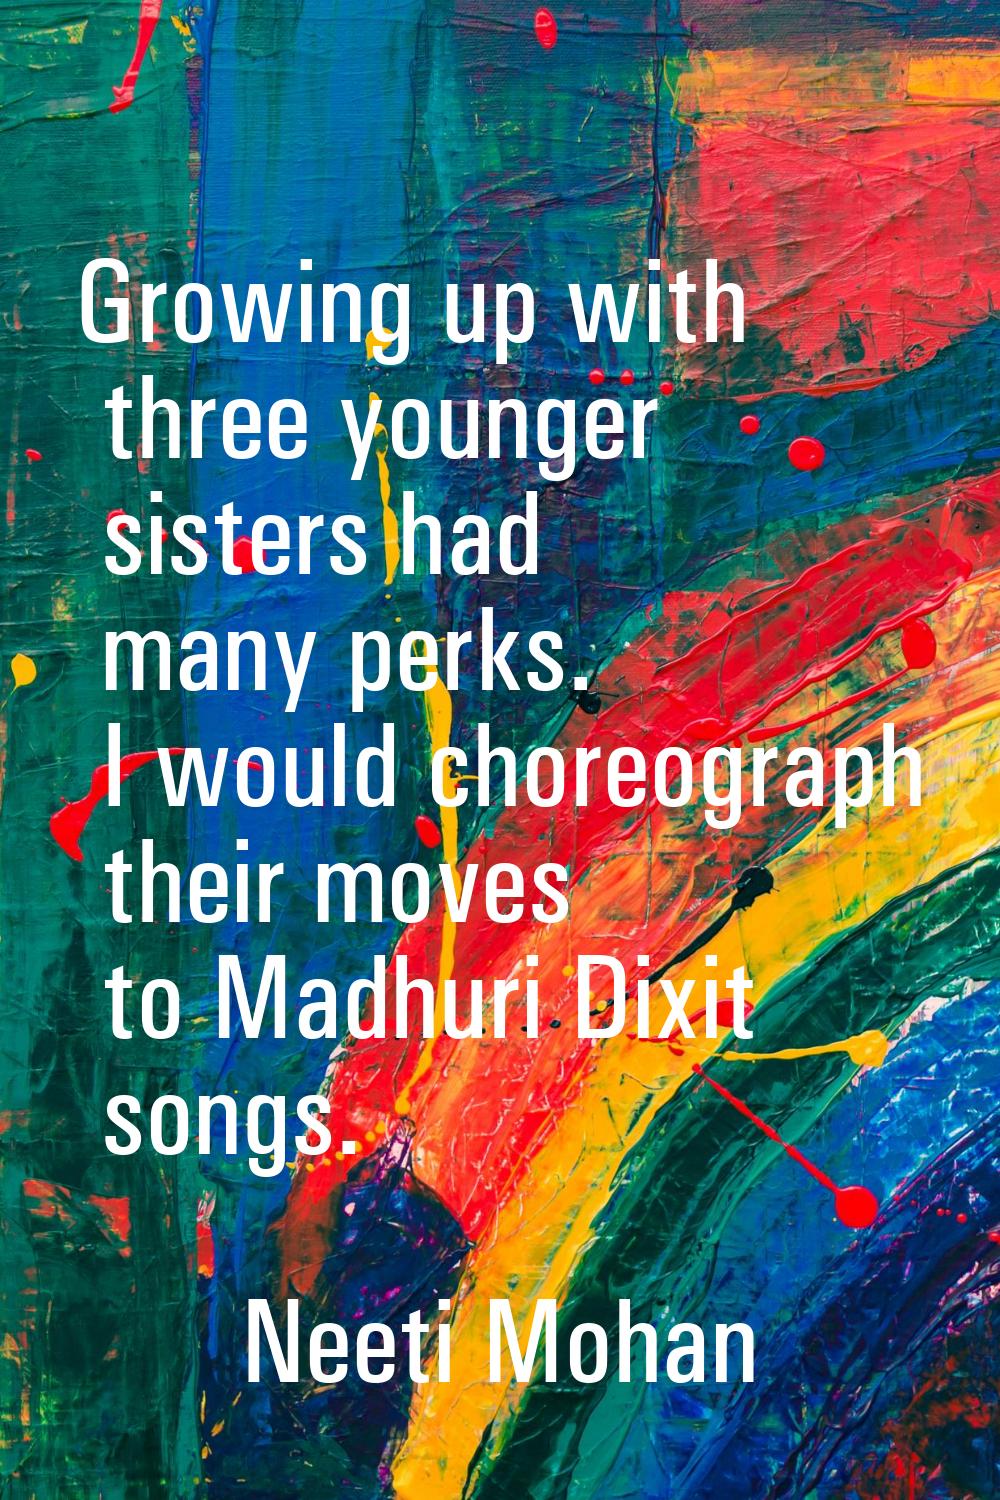 Growing up with three younger sisters had many perks. I would choreograph their moves to Madhuri Di